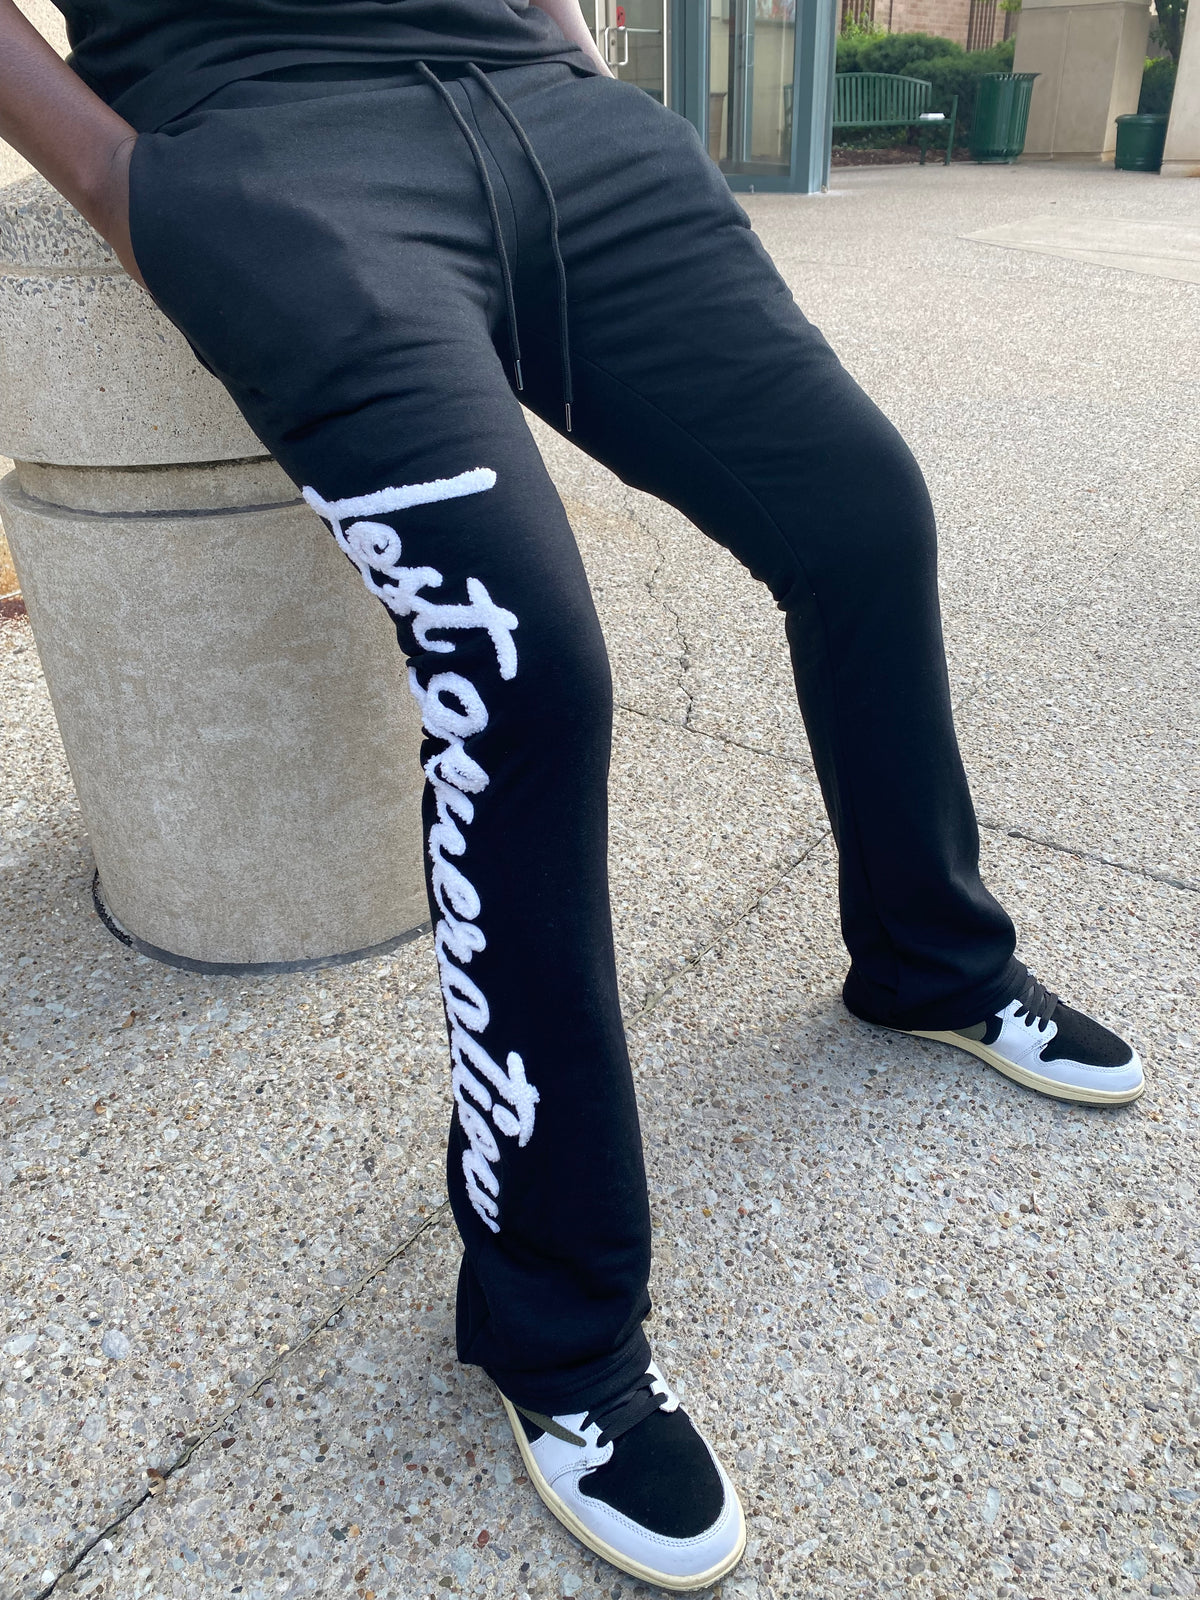 Lost Generations 2 Stacked Sweatpants - Black – Todays Man Store